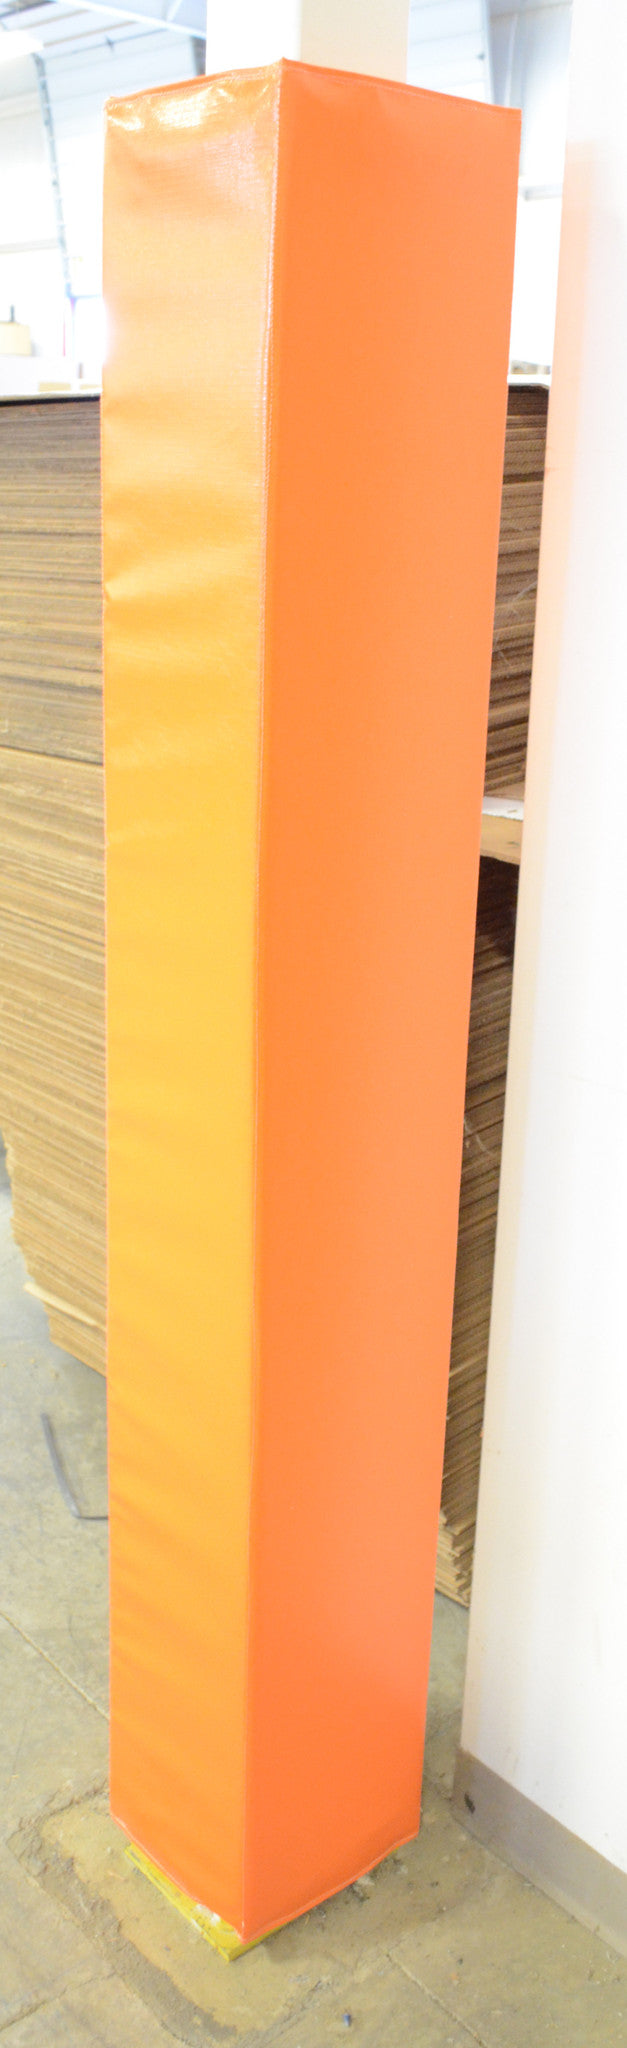 Bright Colors allow warehouses, car garages and other industrial structures to be safely padded.